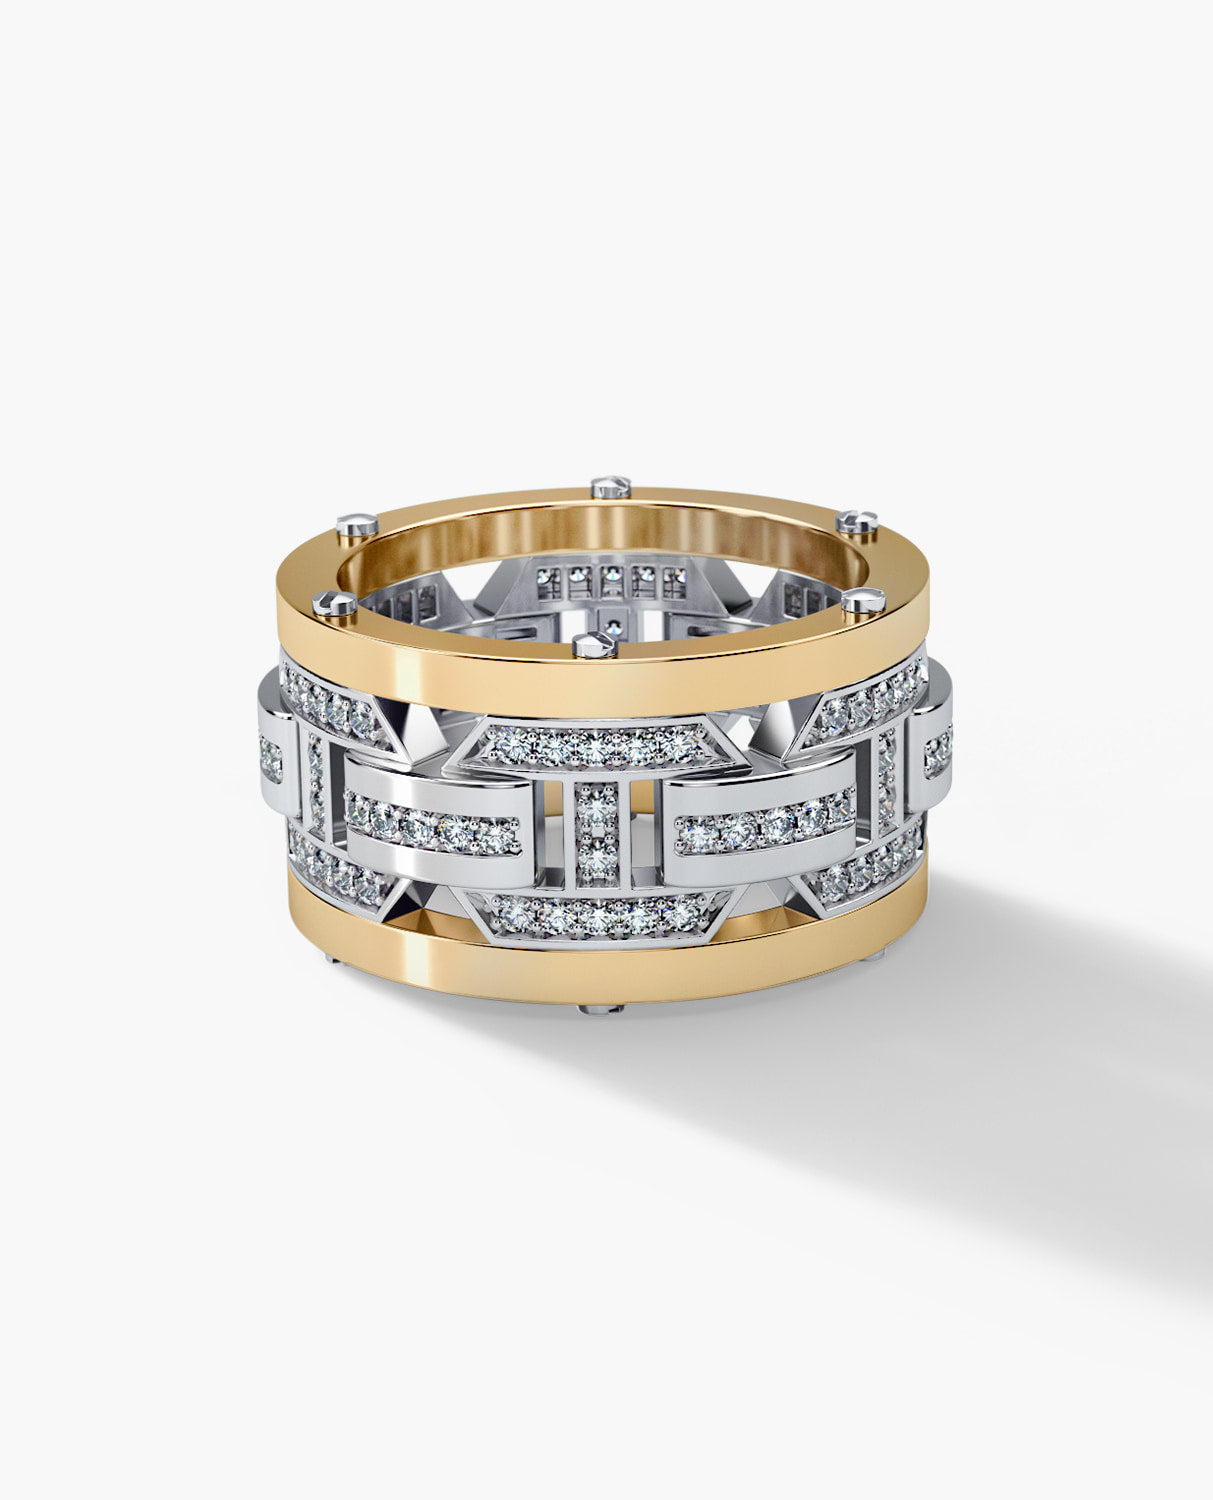 BRIGGS Mens TwoTone Gold Wedding Band with Diamonds